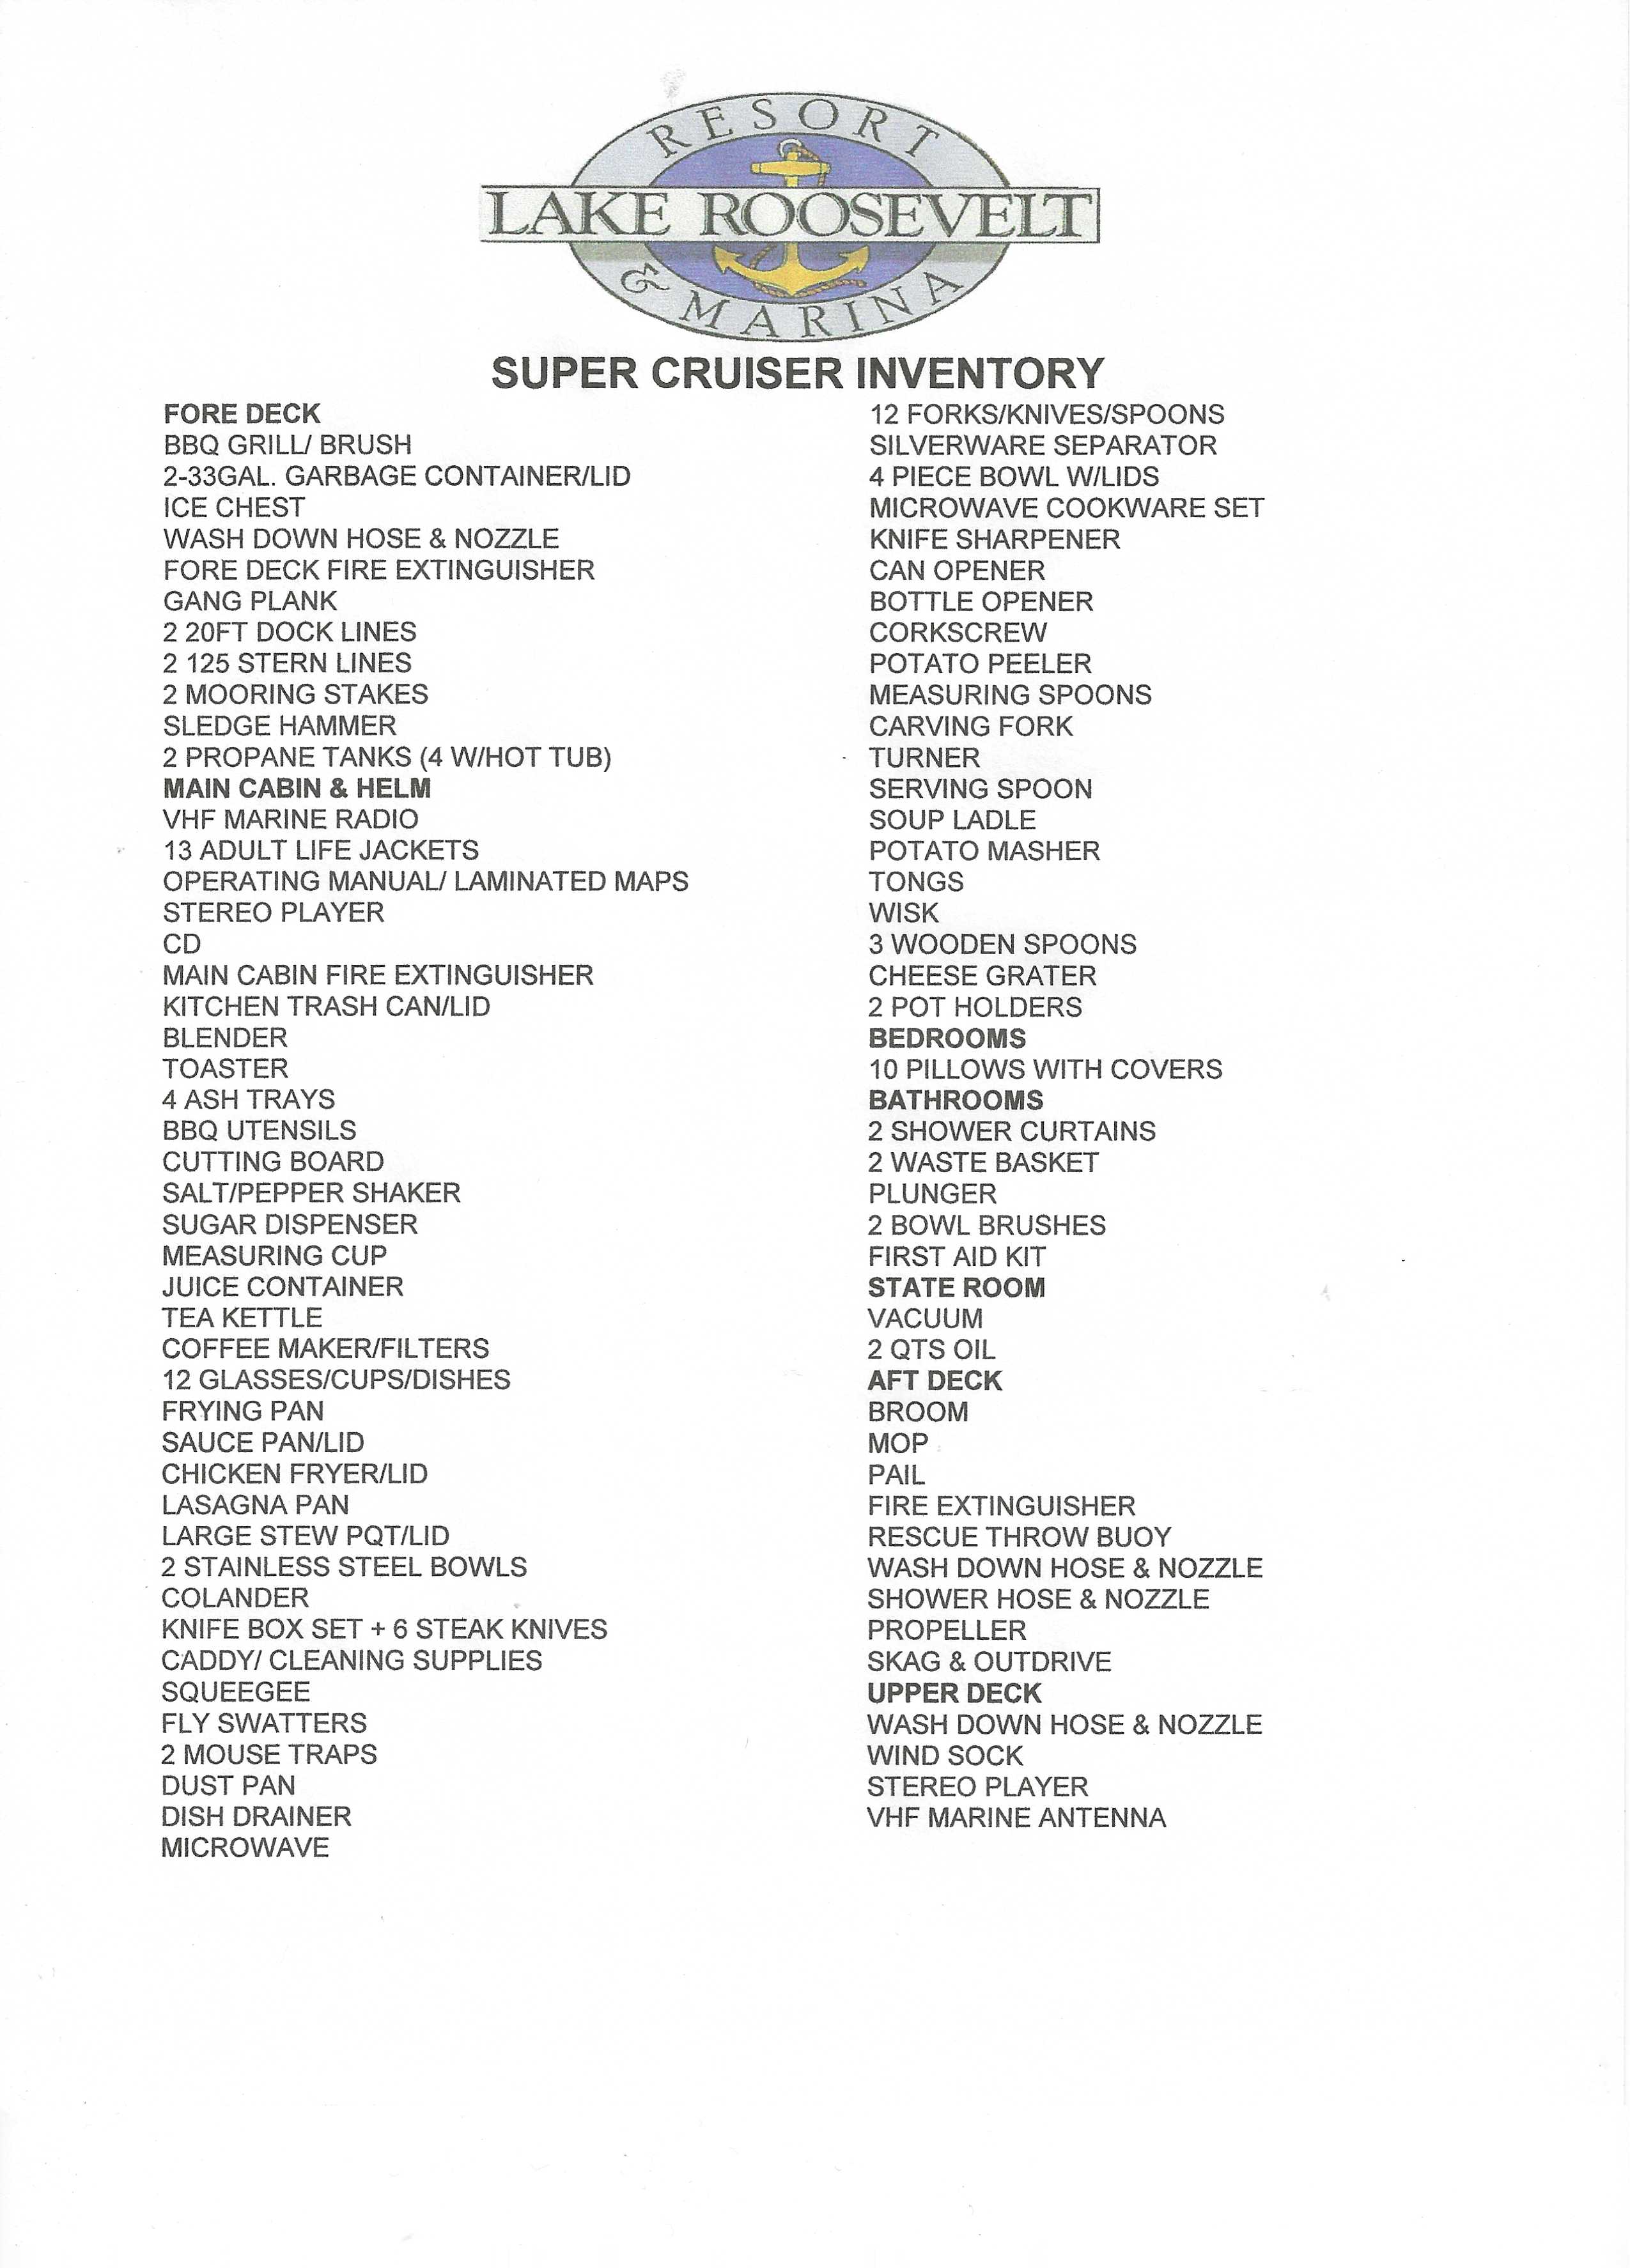 Link to SuperCruiser Inventory